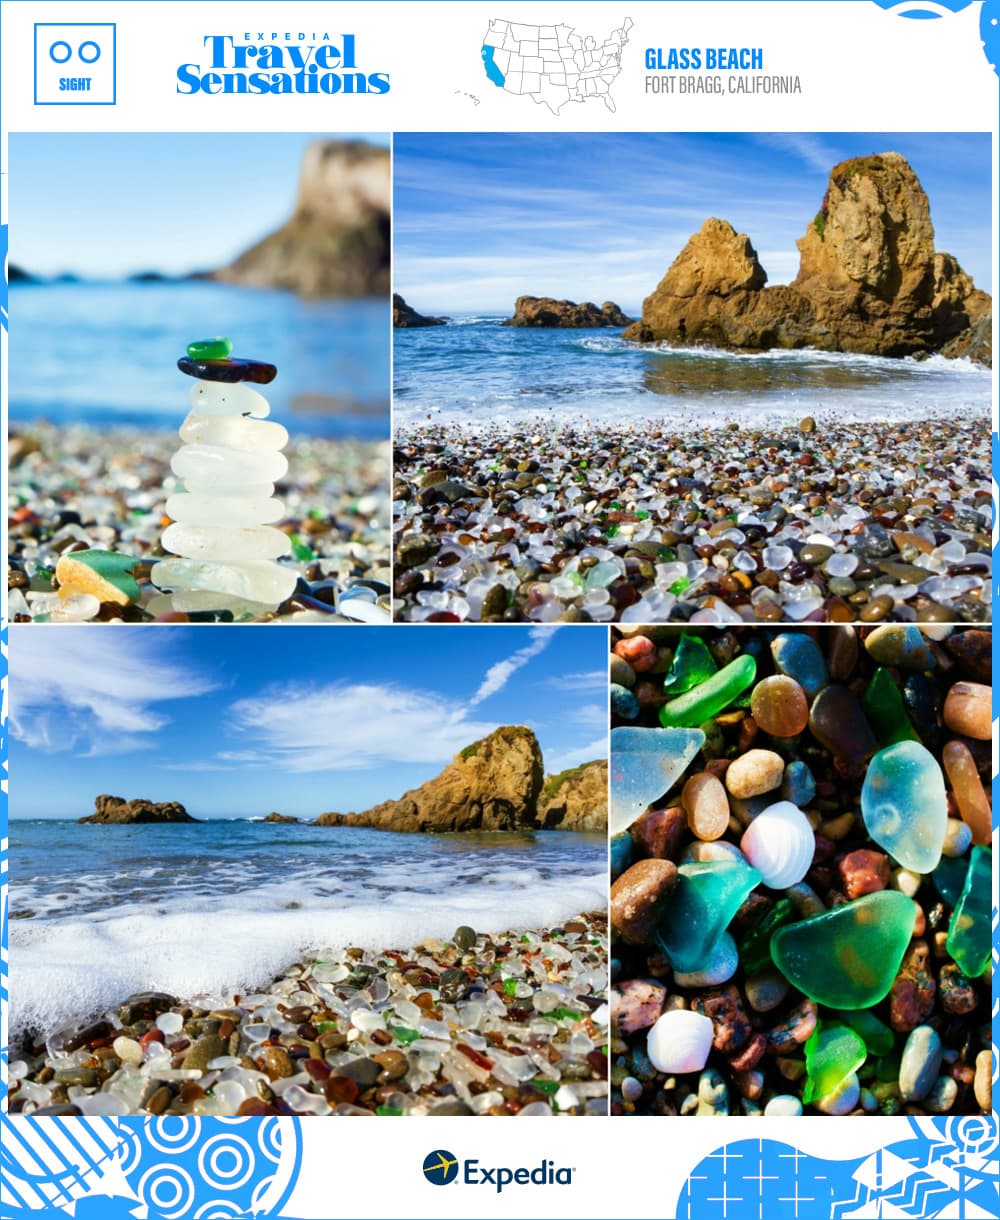 haystack rocks and smooth, colorful glass pebbles on Glass Beach, CA